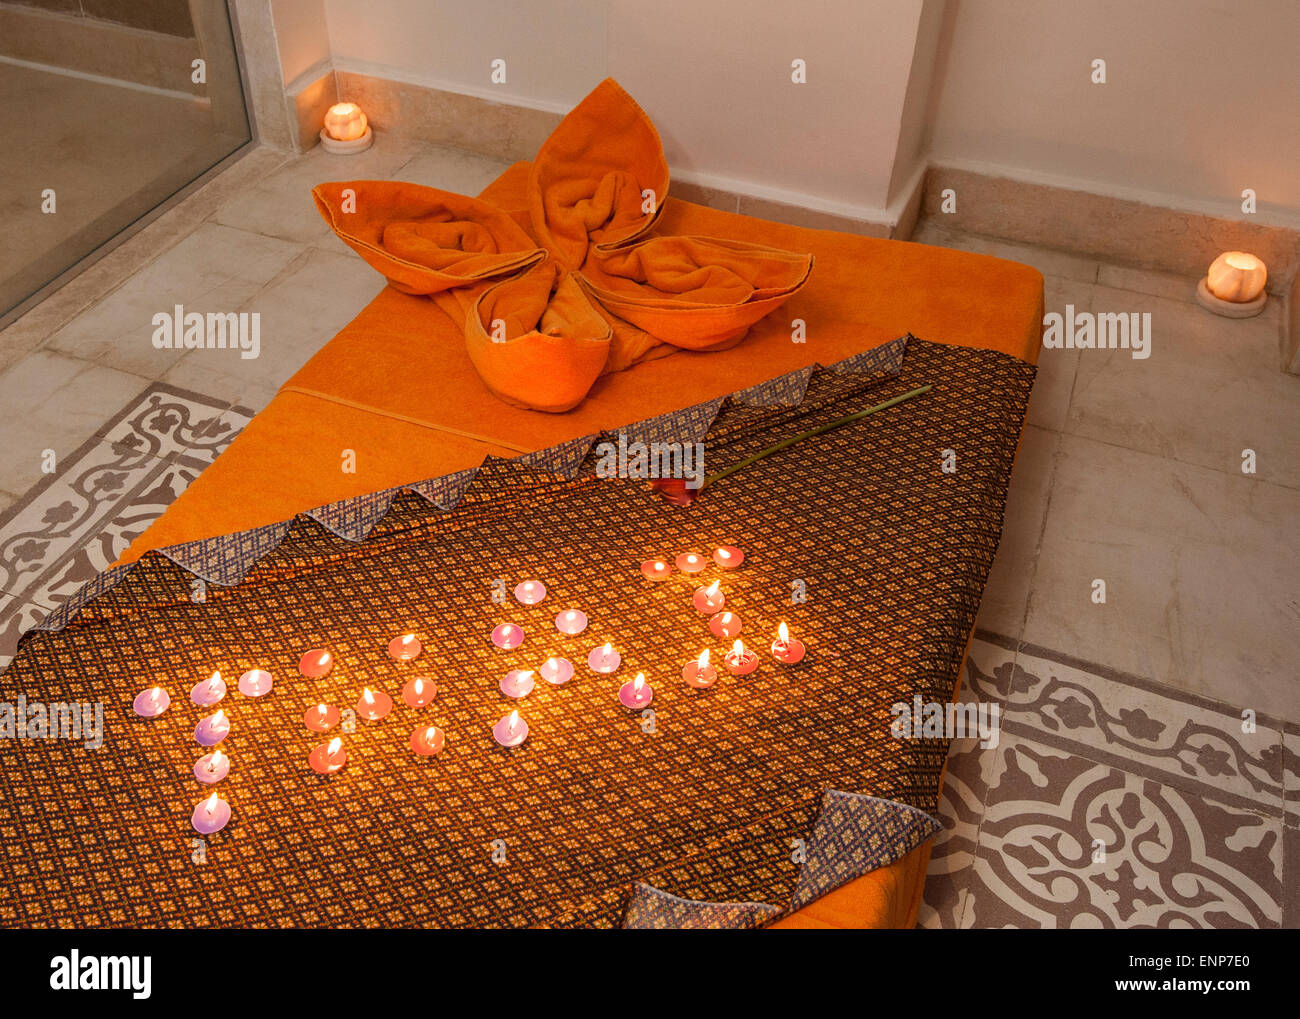 Closeup detail of a Thai massage bed on the floor in luxury health spa with candles Stock Photo